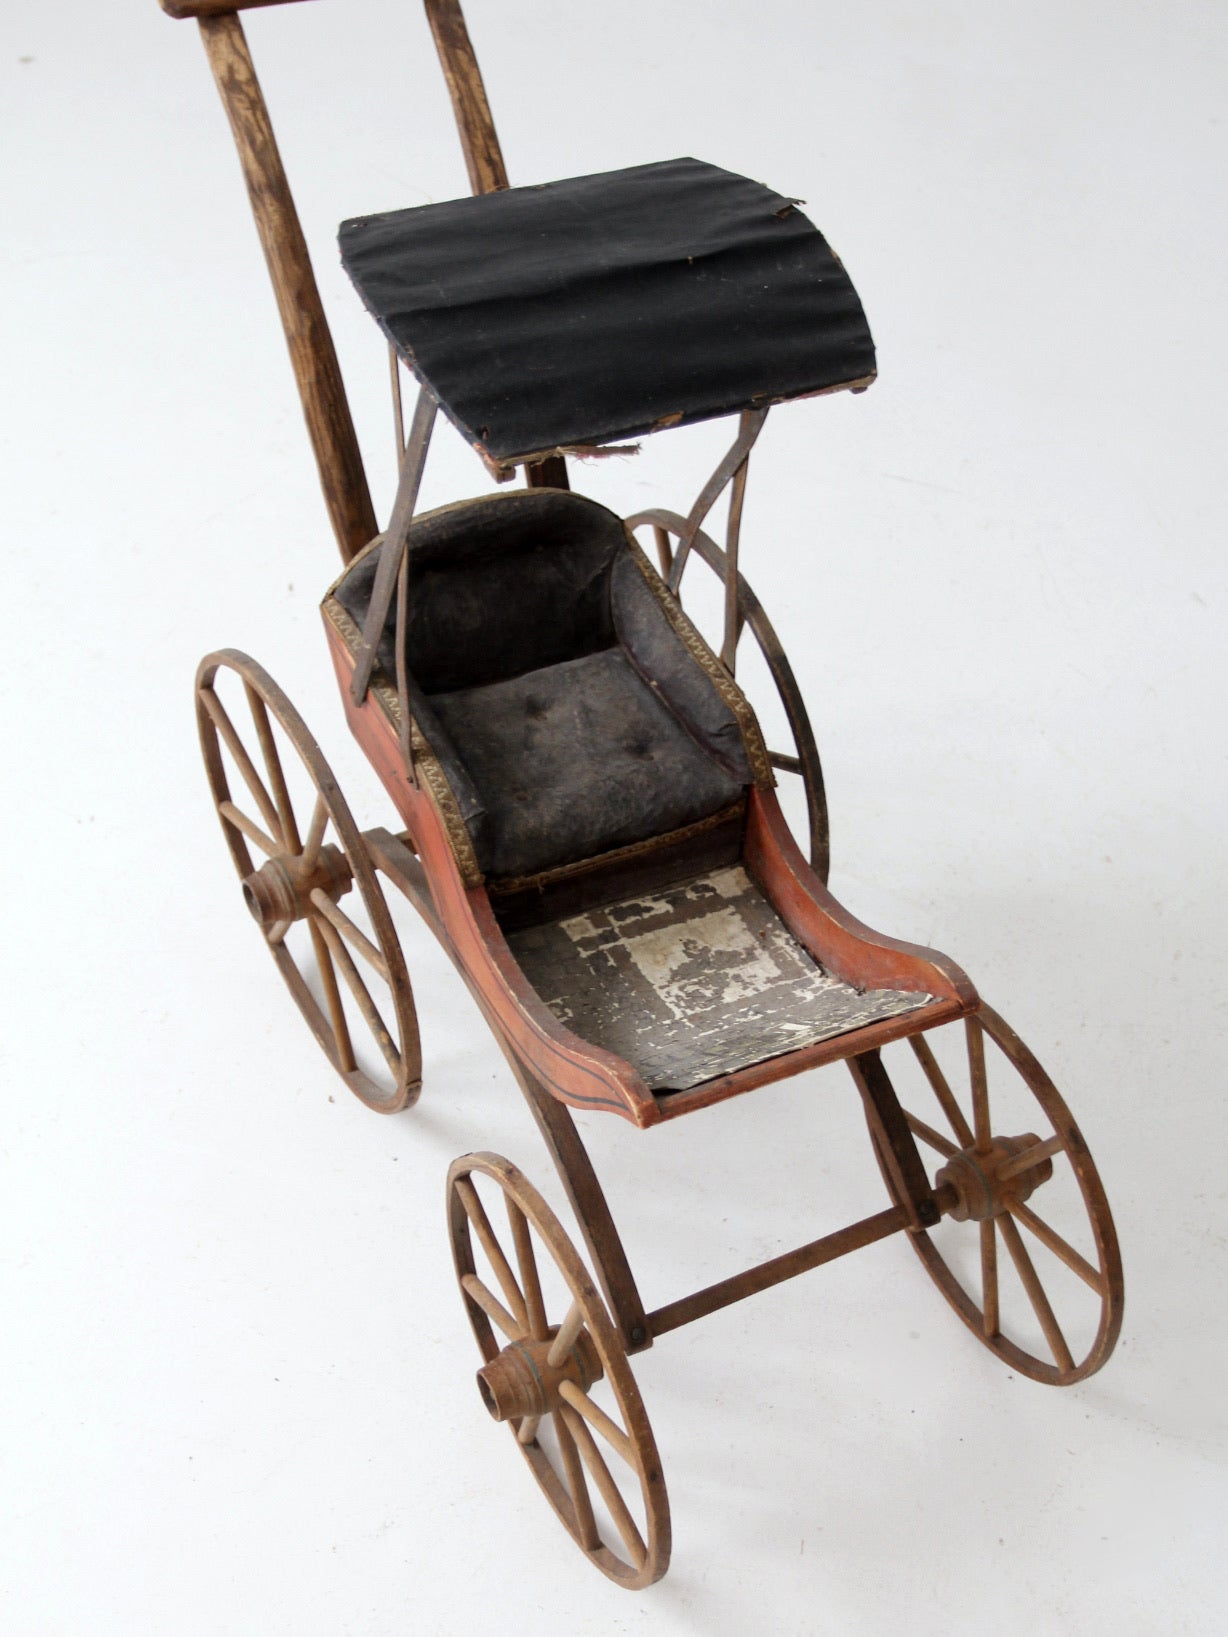 Victorian doll carriage with canopy